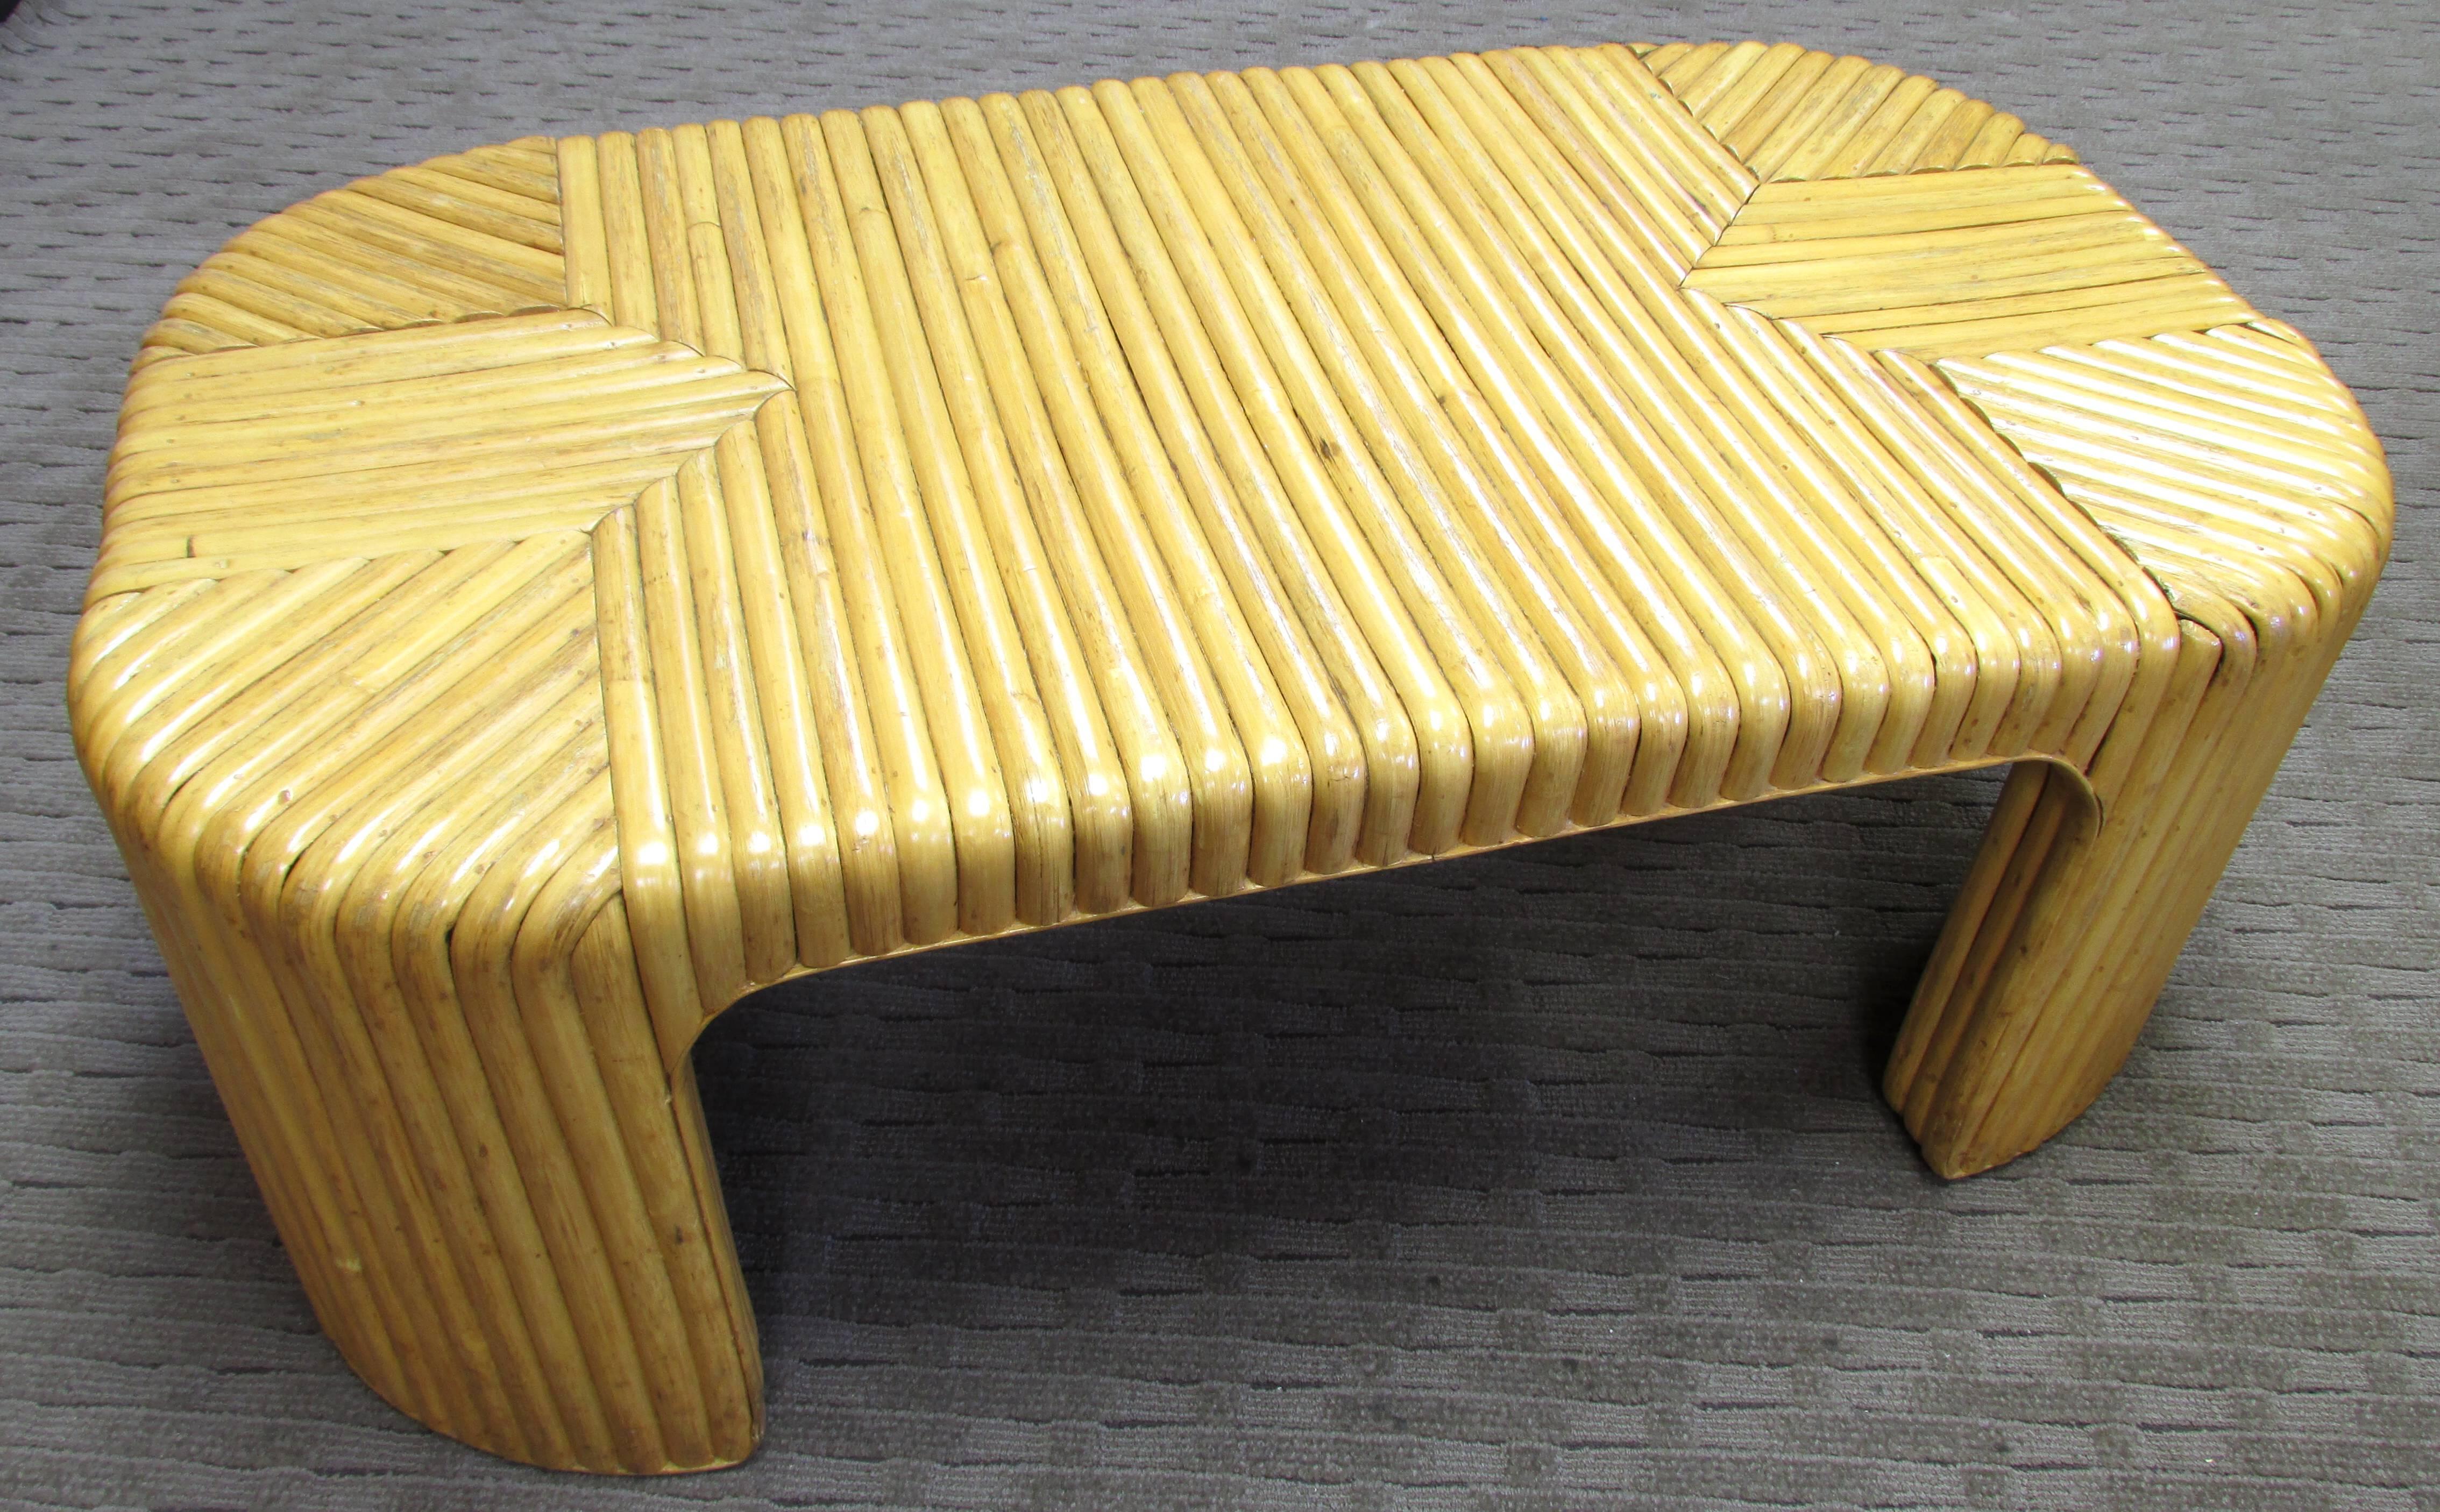 Nice oblong coffee table covered with rattan in graphic pattern with rounded corners